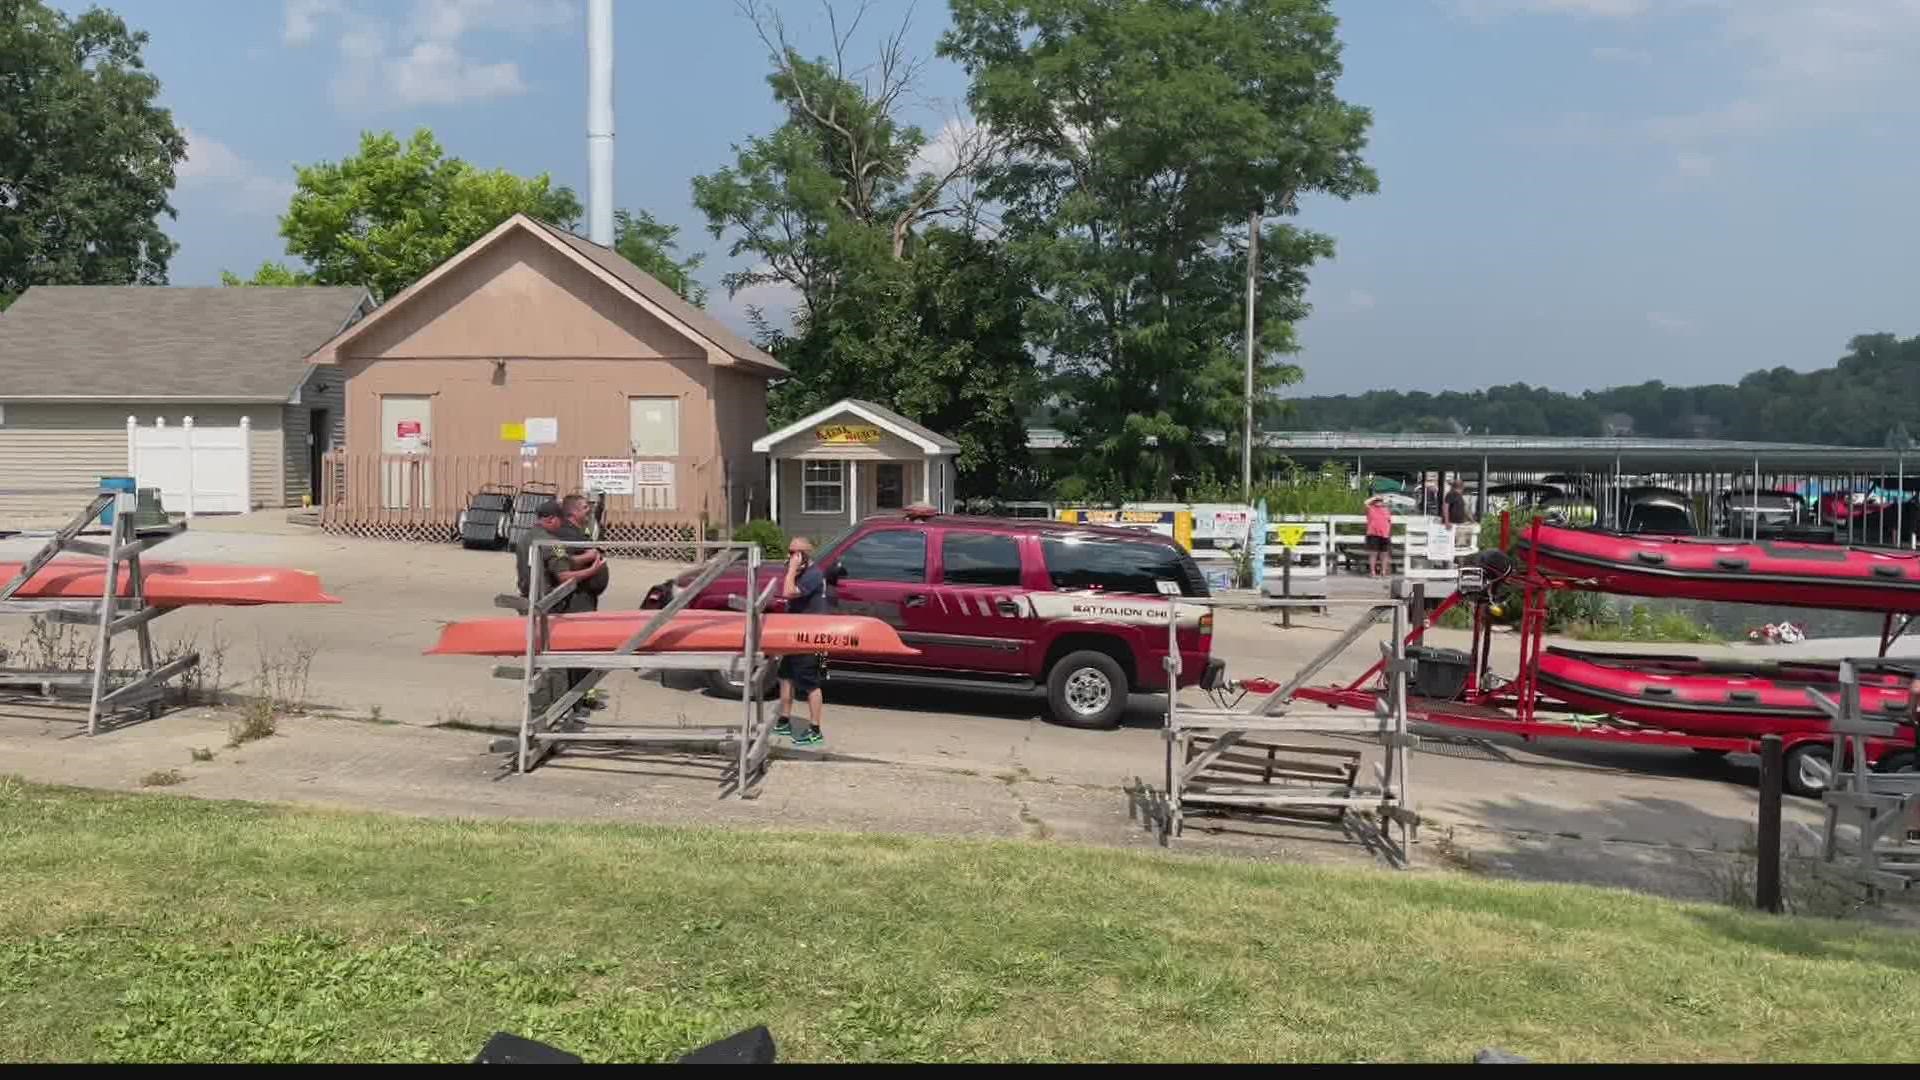 We've learned the man who divers pulled from Geist Reservoir Sunday has died at the hospital.